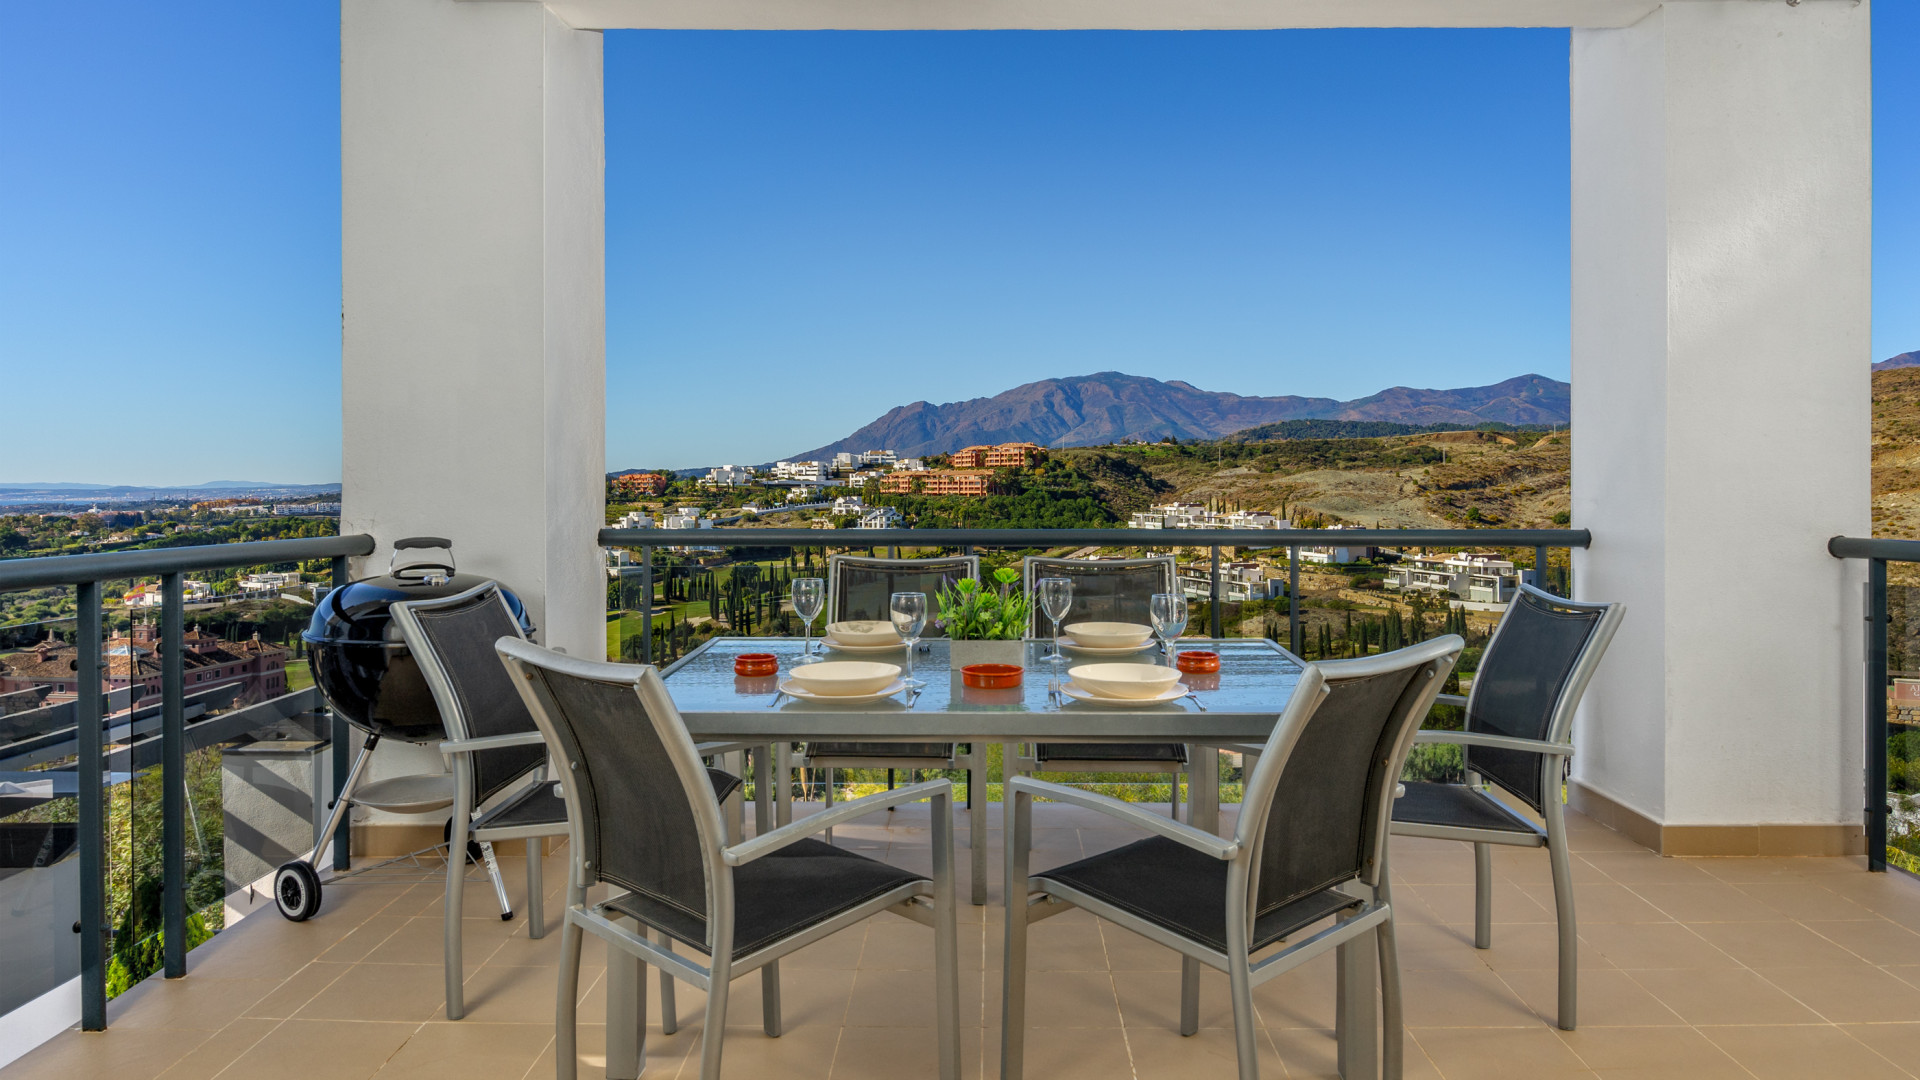 Lovely apartment with panoramic views over the coast, the Mediterranean and the mountains in Acosta Los Flamingos